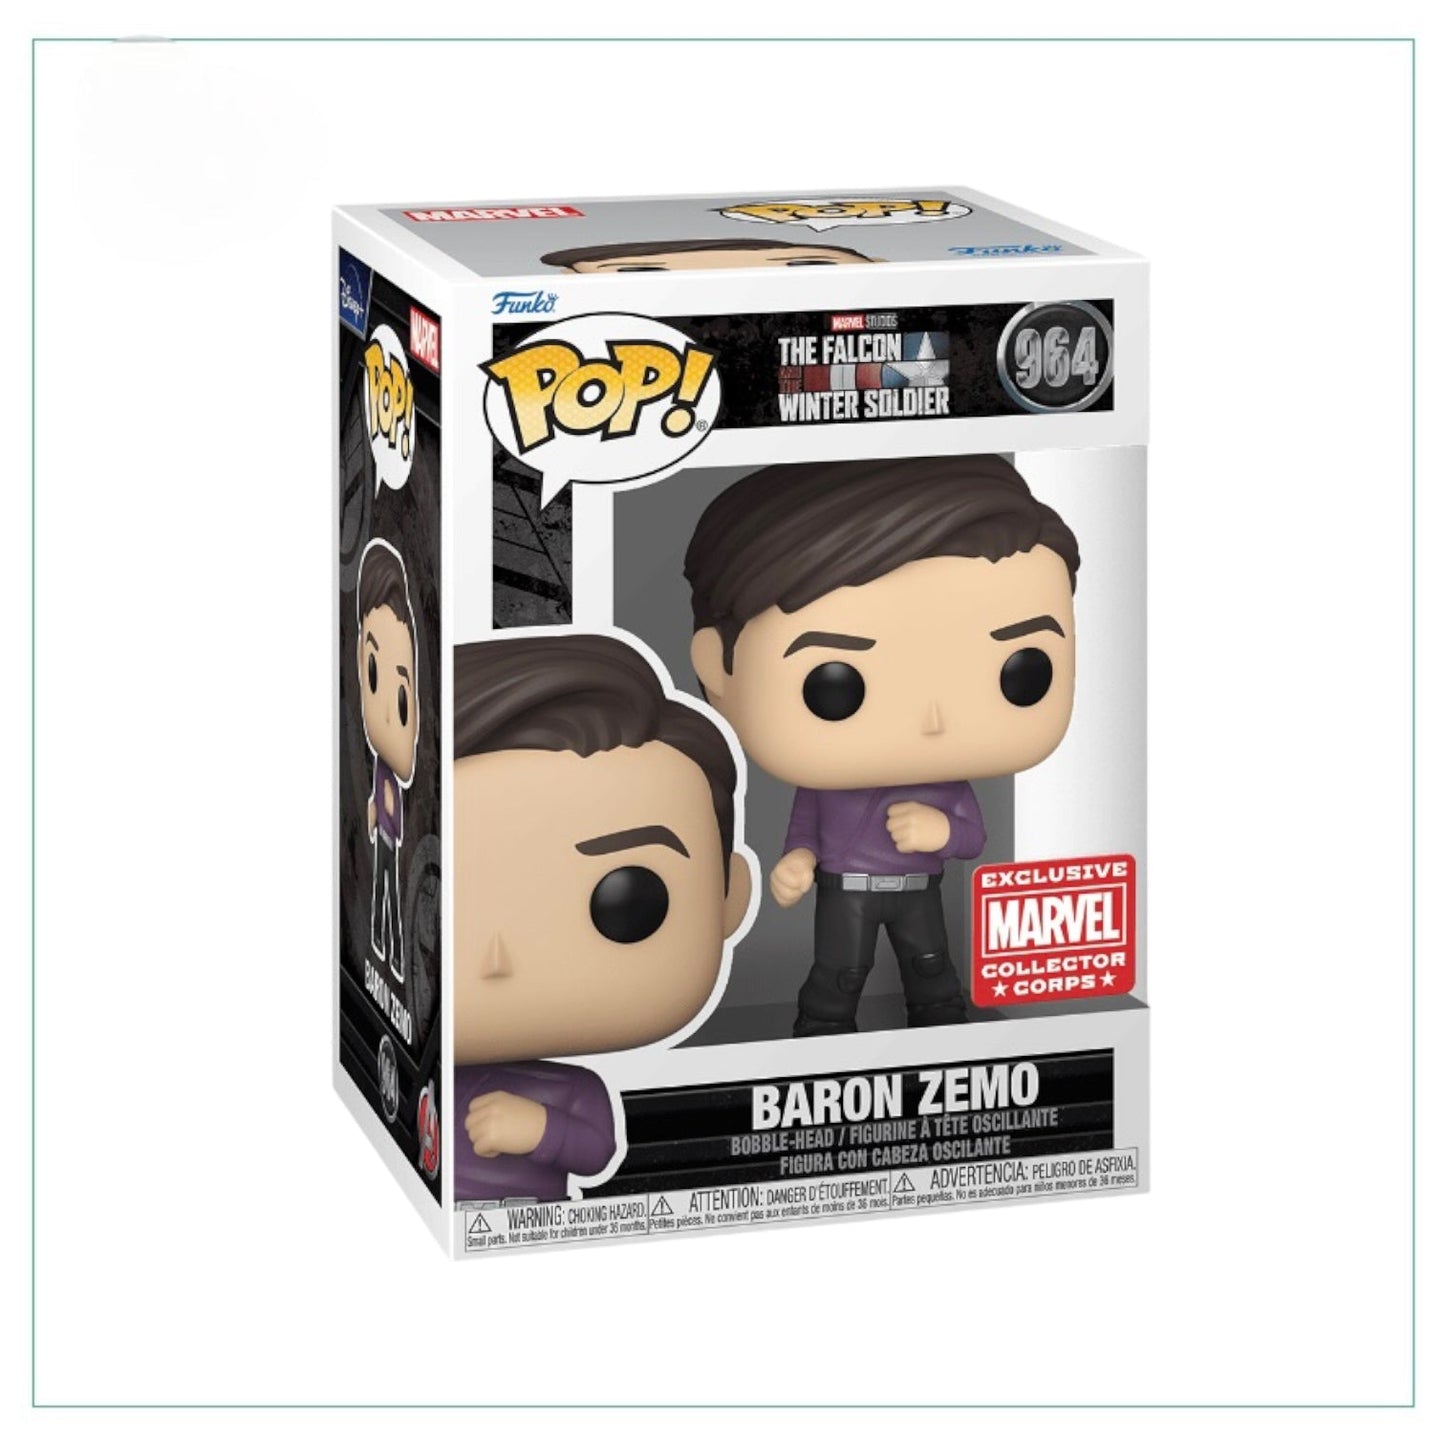 Baron Zemo #964 Funko Pop! - The Falcon and The Winter Soldier - Marvel Collector Corps Exclusive - Angry Cat